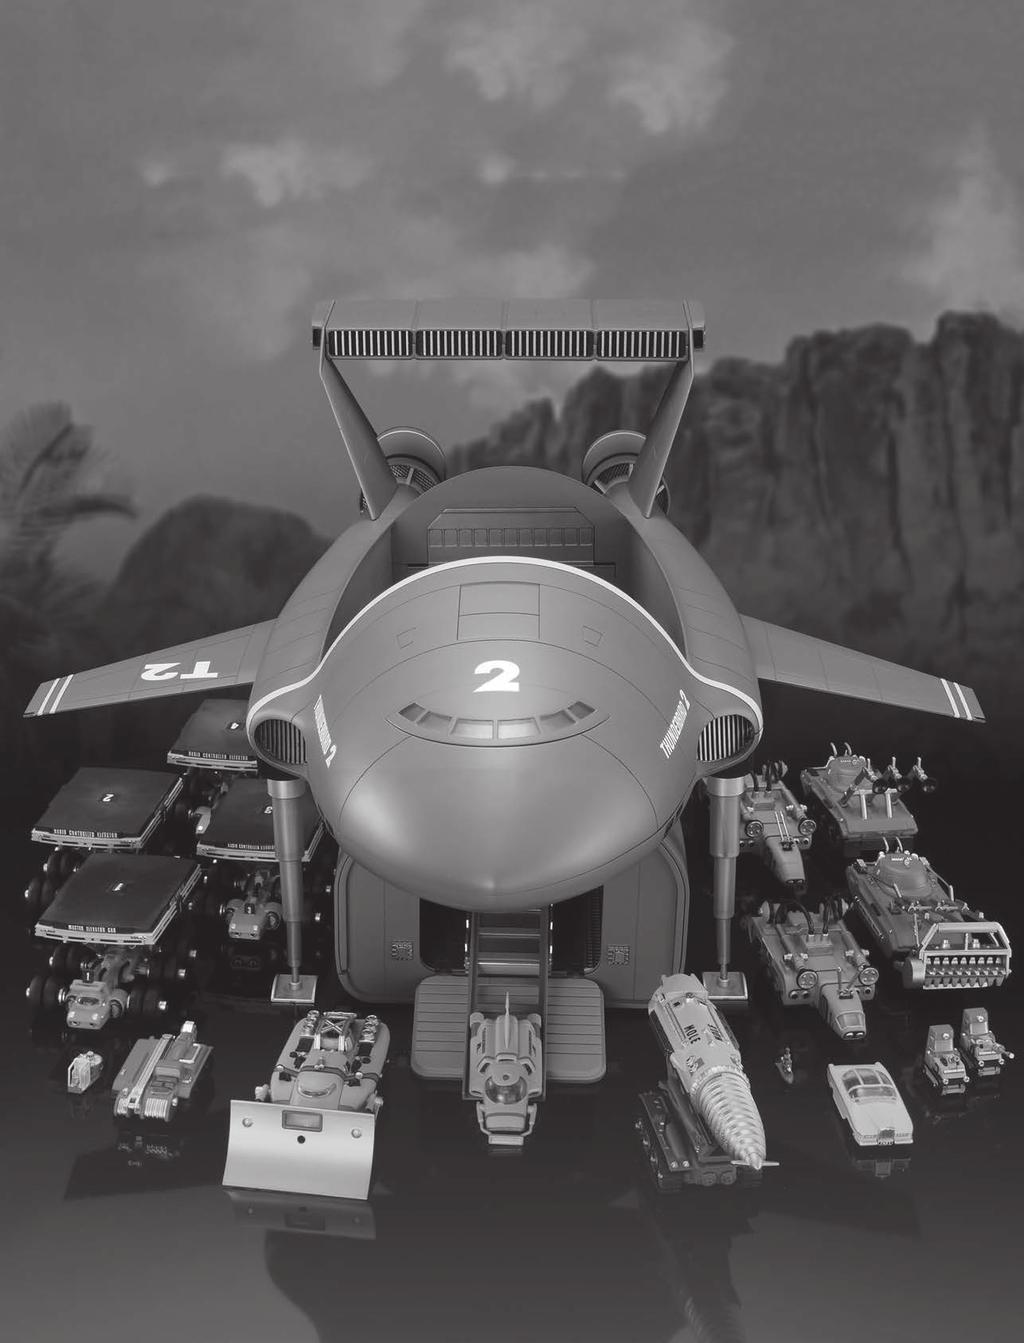 STAGE PAGE 74 Tailwing ramjets and Cobra Half-track 247 75 Tailwing intakes 250 76 Tailwing fins 253 77 T2 control board 255 78 T2 wings and Mobile Crane 258 79 T2 side frames and